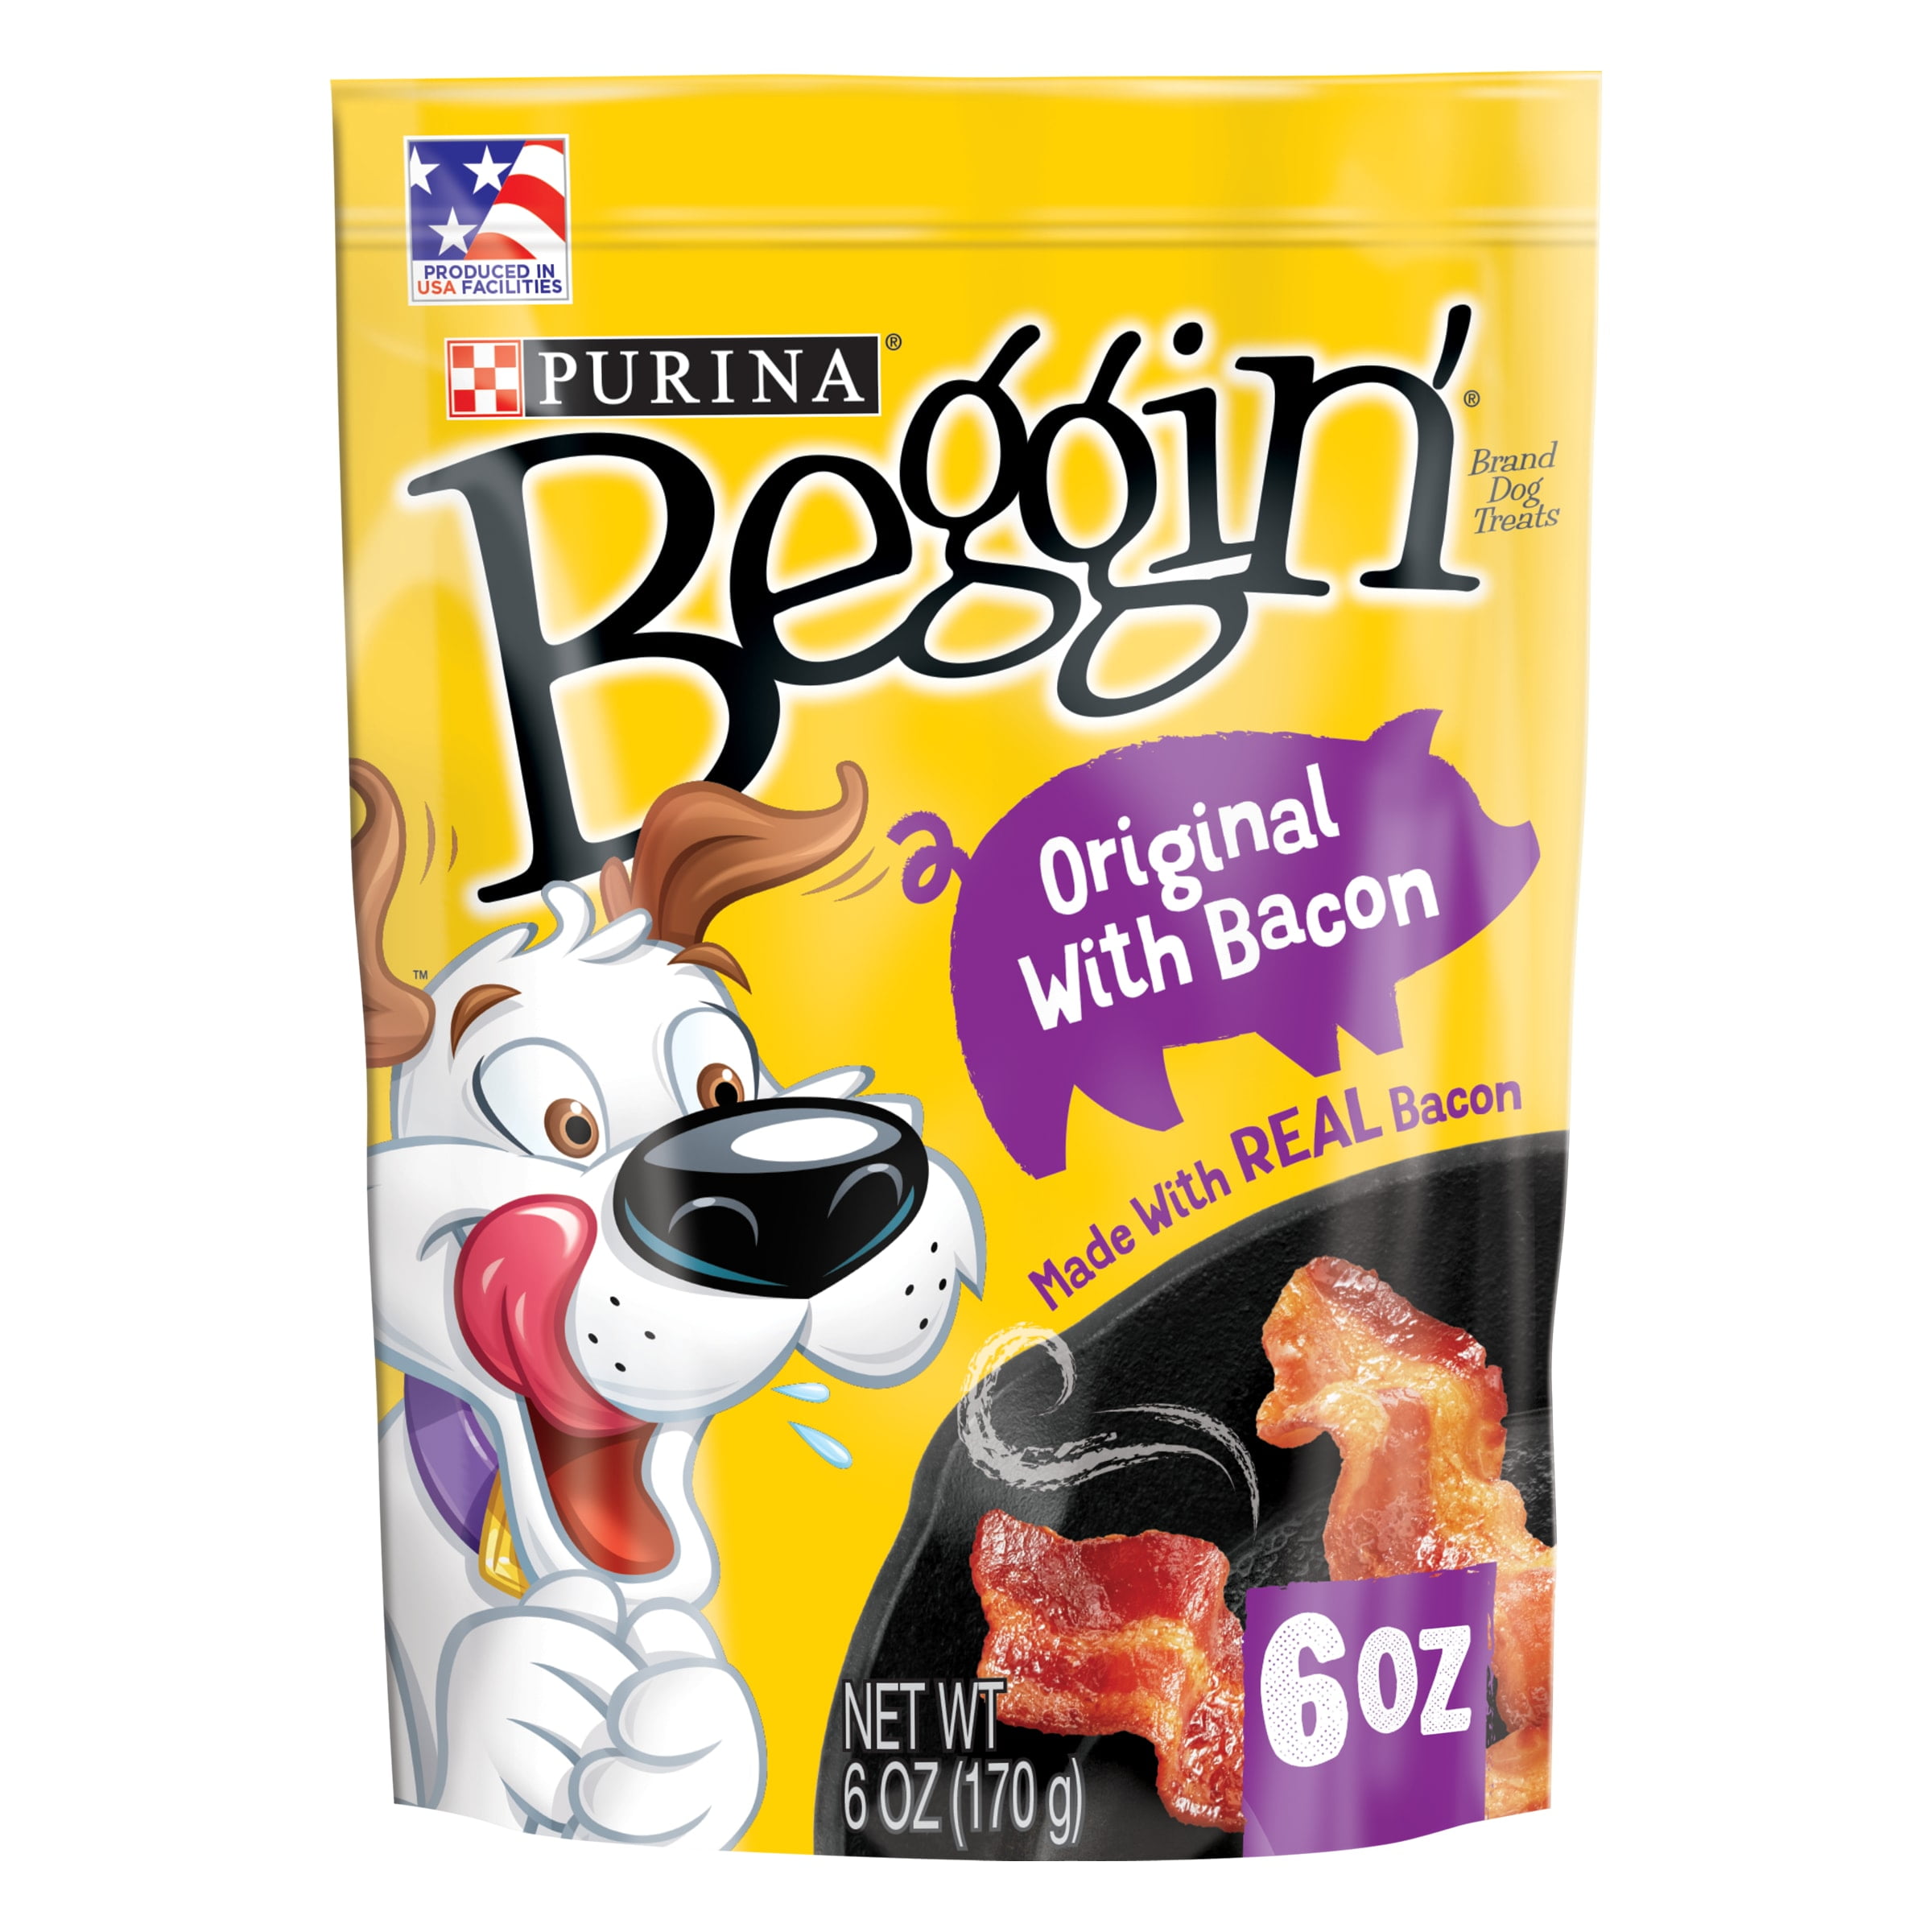 Purina Beggin' Original with Bacon Treats for Dogs, 6 oz Pouch